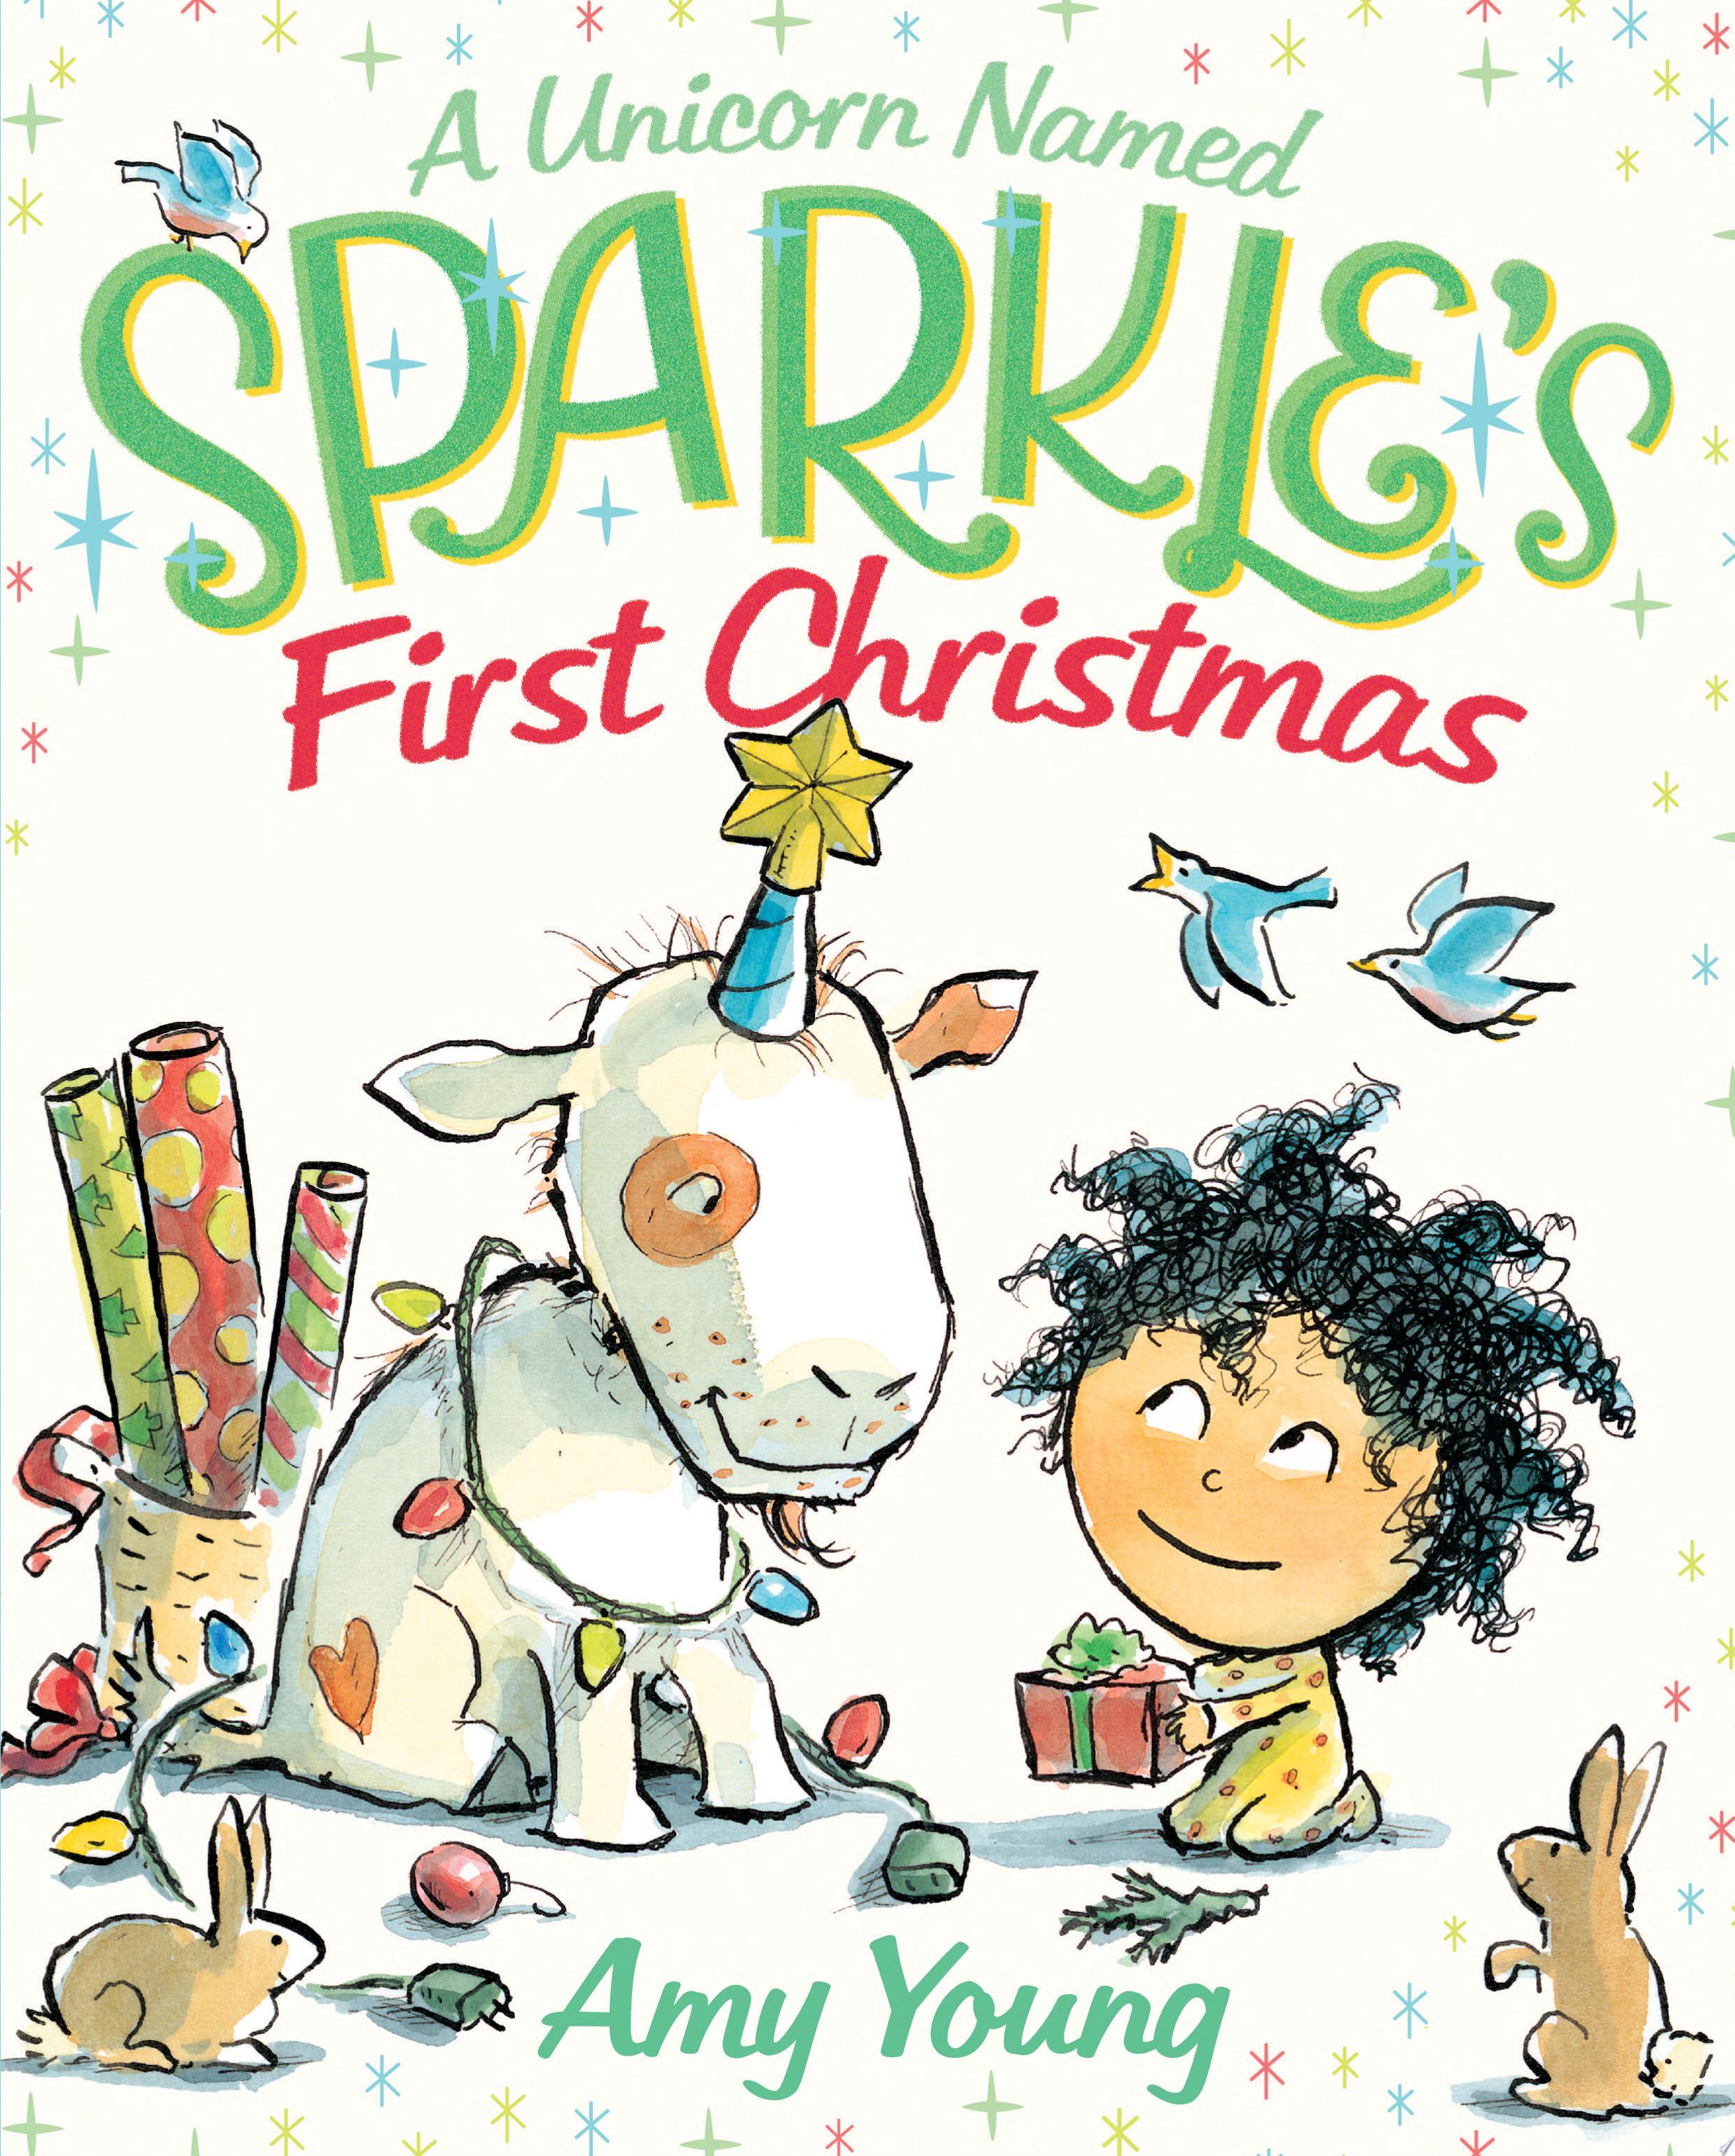 Image for "A Unicorn Named Sparkle&#039;s First Christmas"